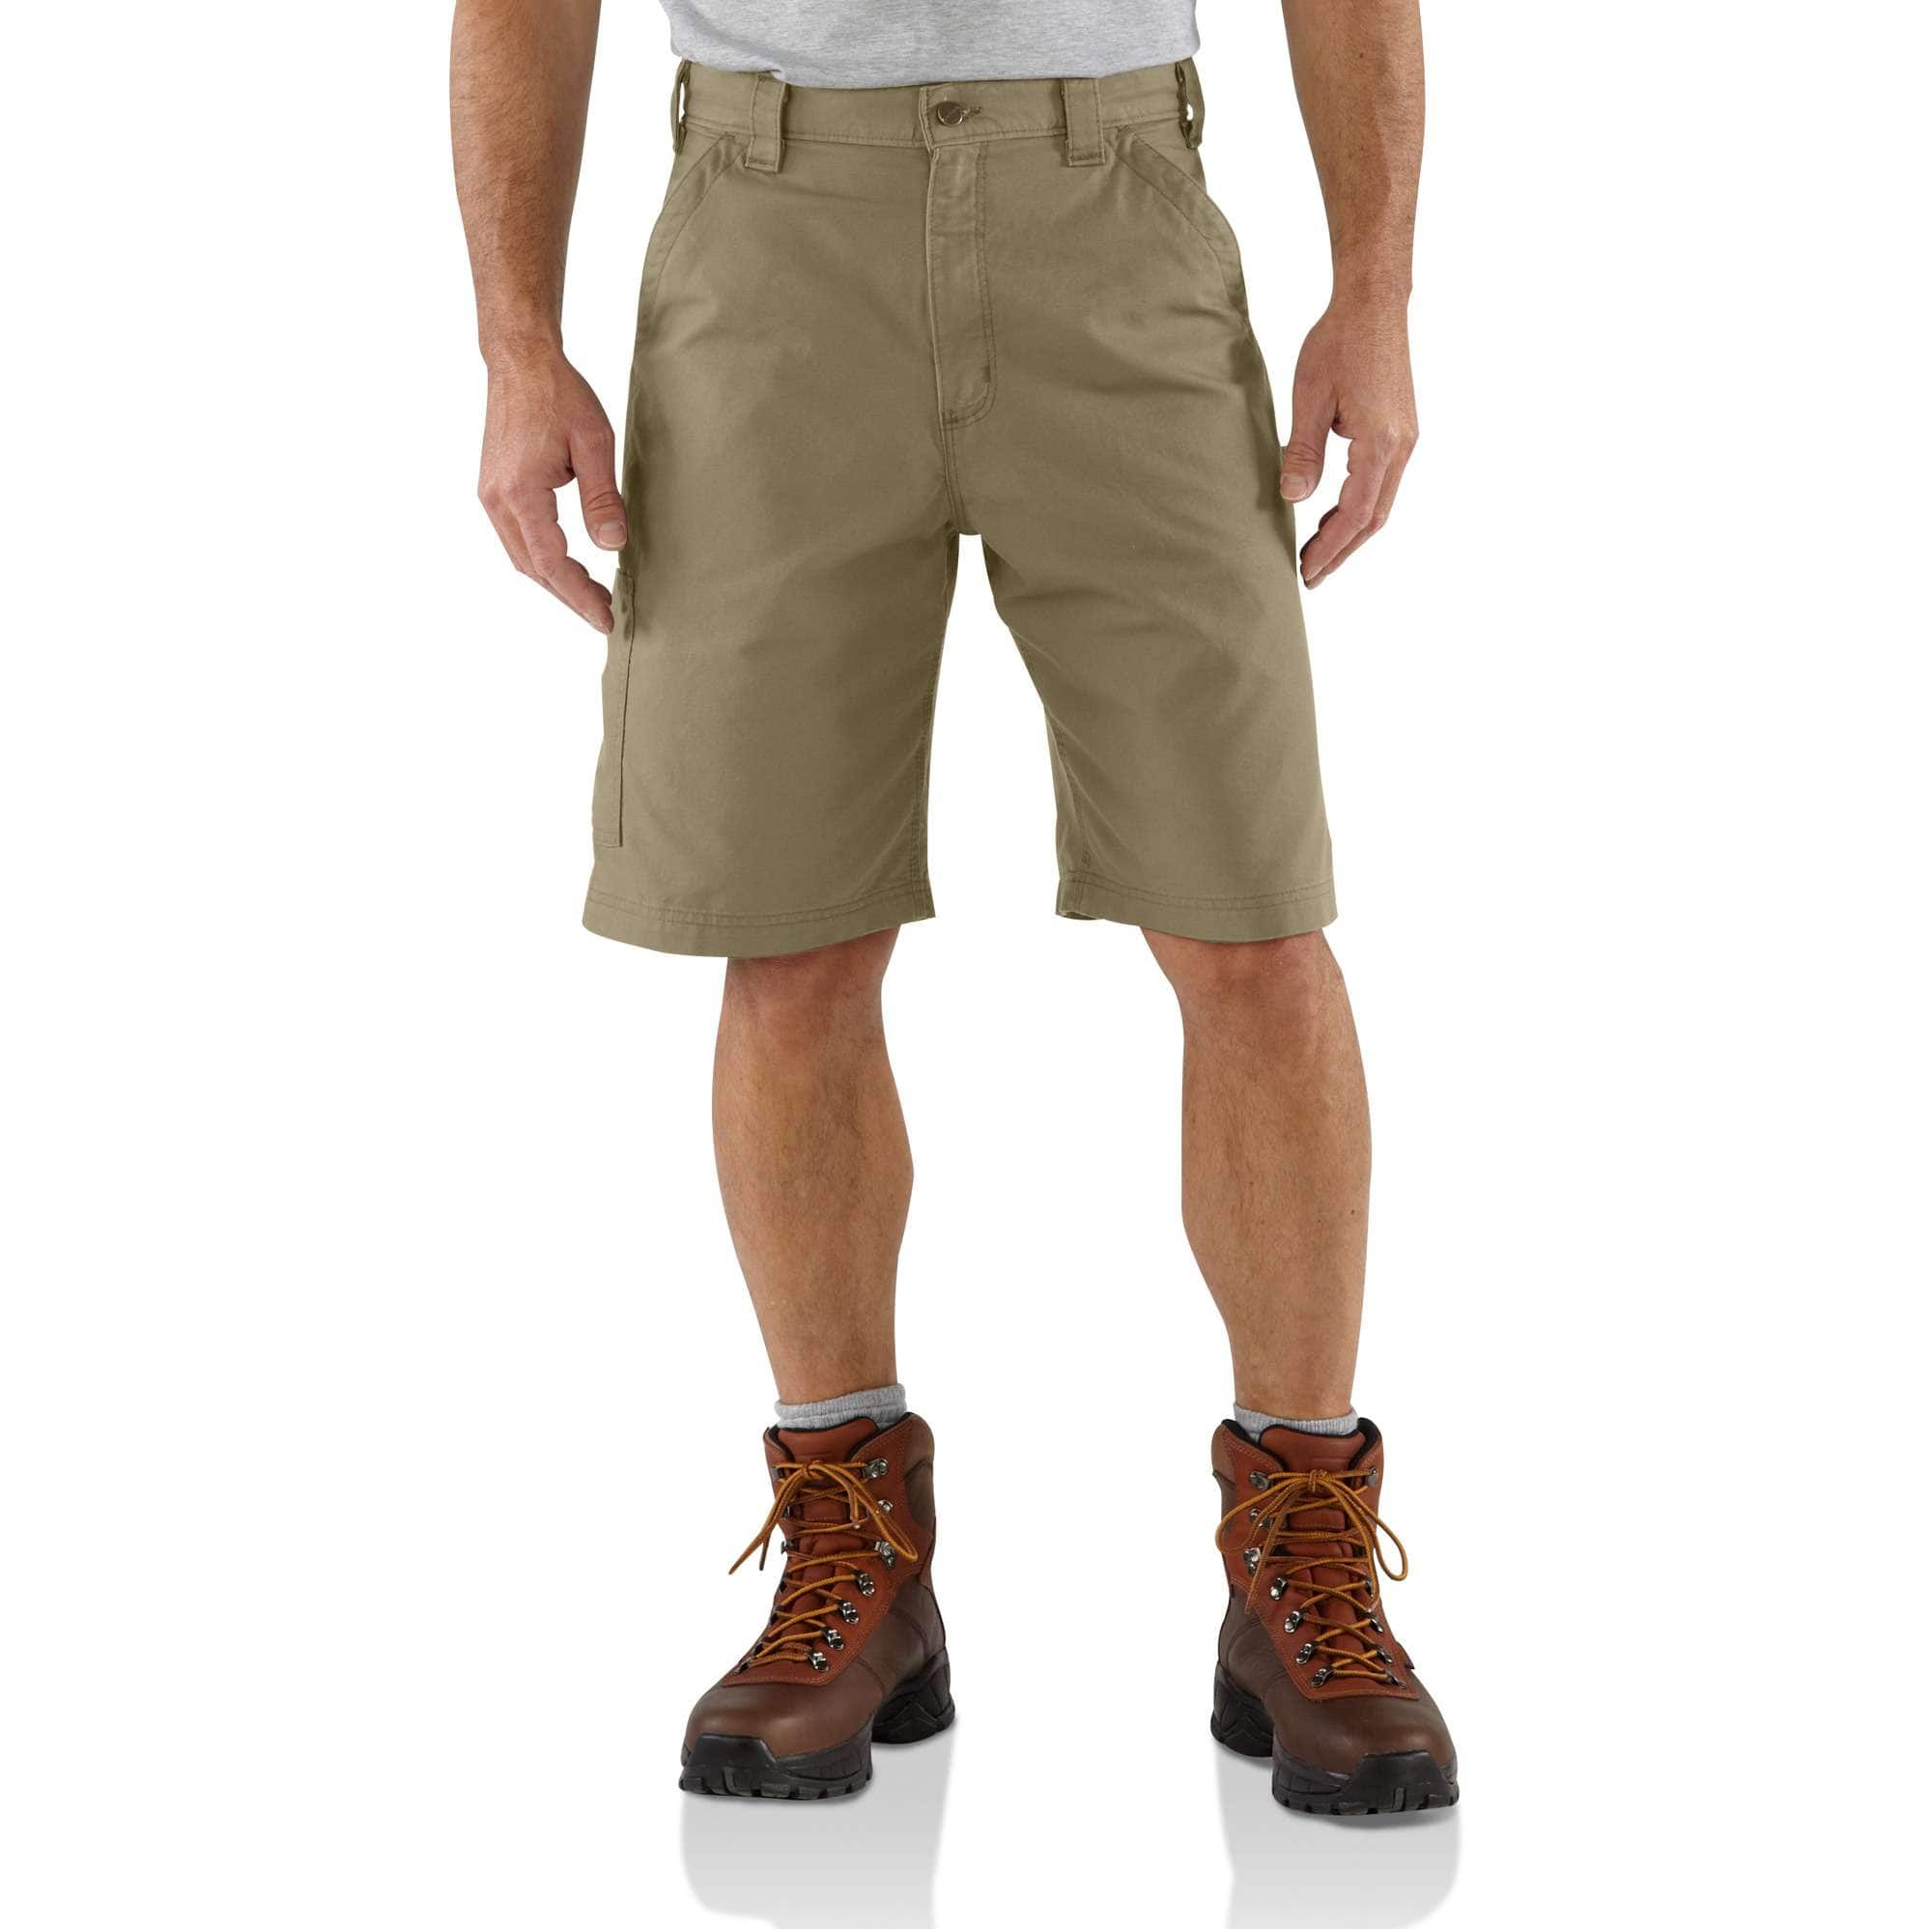 Loose Fit Canvas Utility Work Short